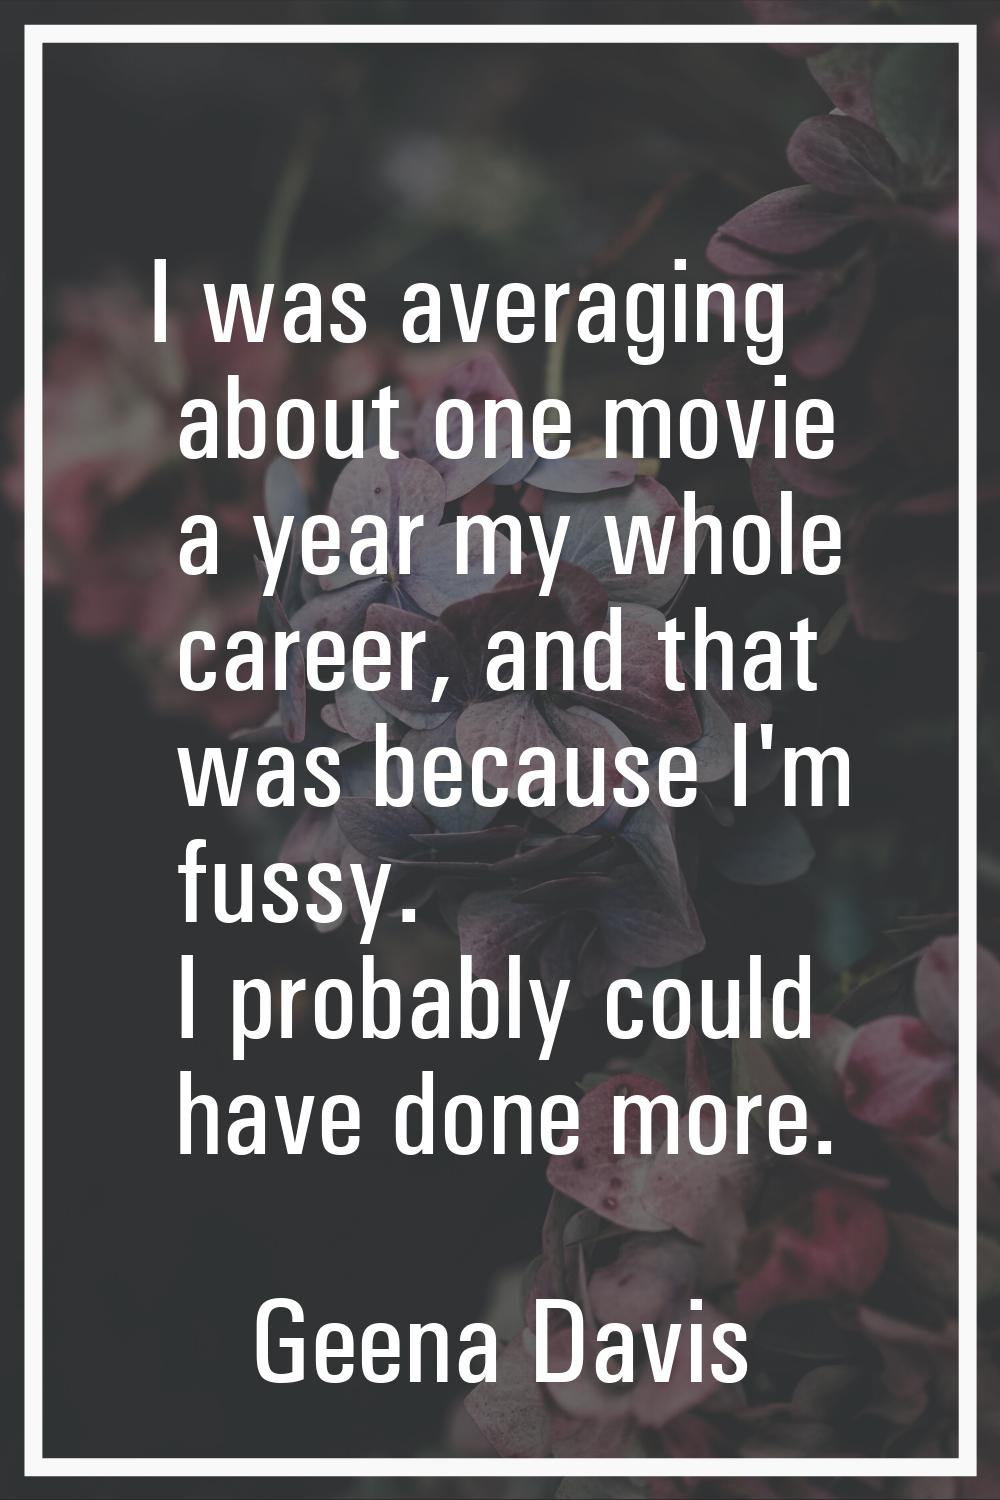 I was averaging about one movie a year my whole career, and that was because I'm fussy. I probably 